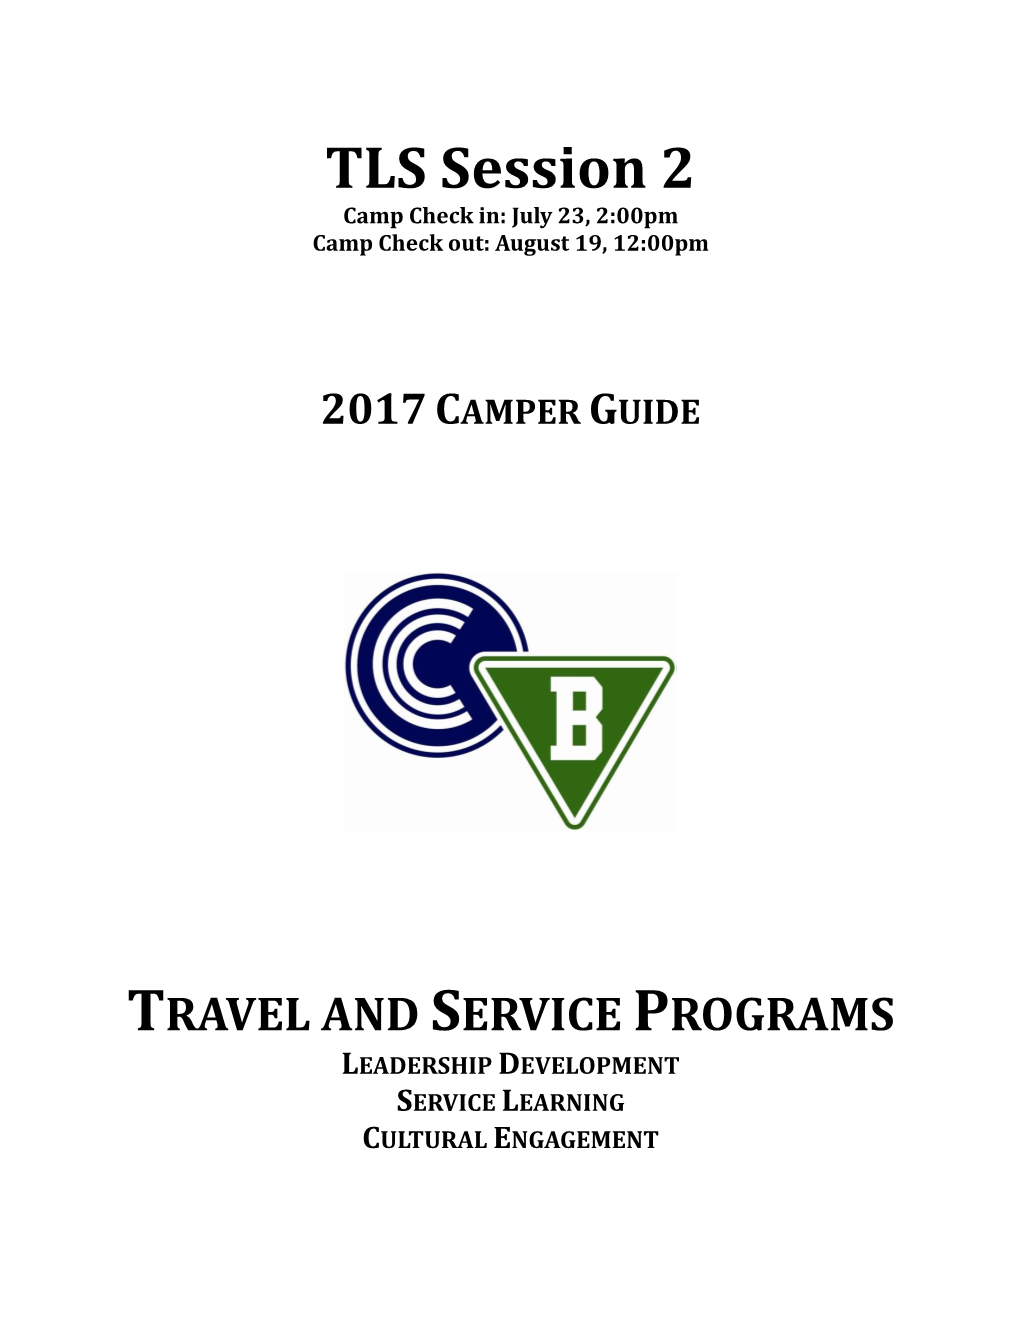 TLS Session 2 Camp Check In: July 23, 2:00Pm Camp Check Out: August 19, 12:00Pm